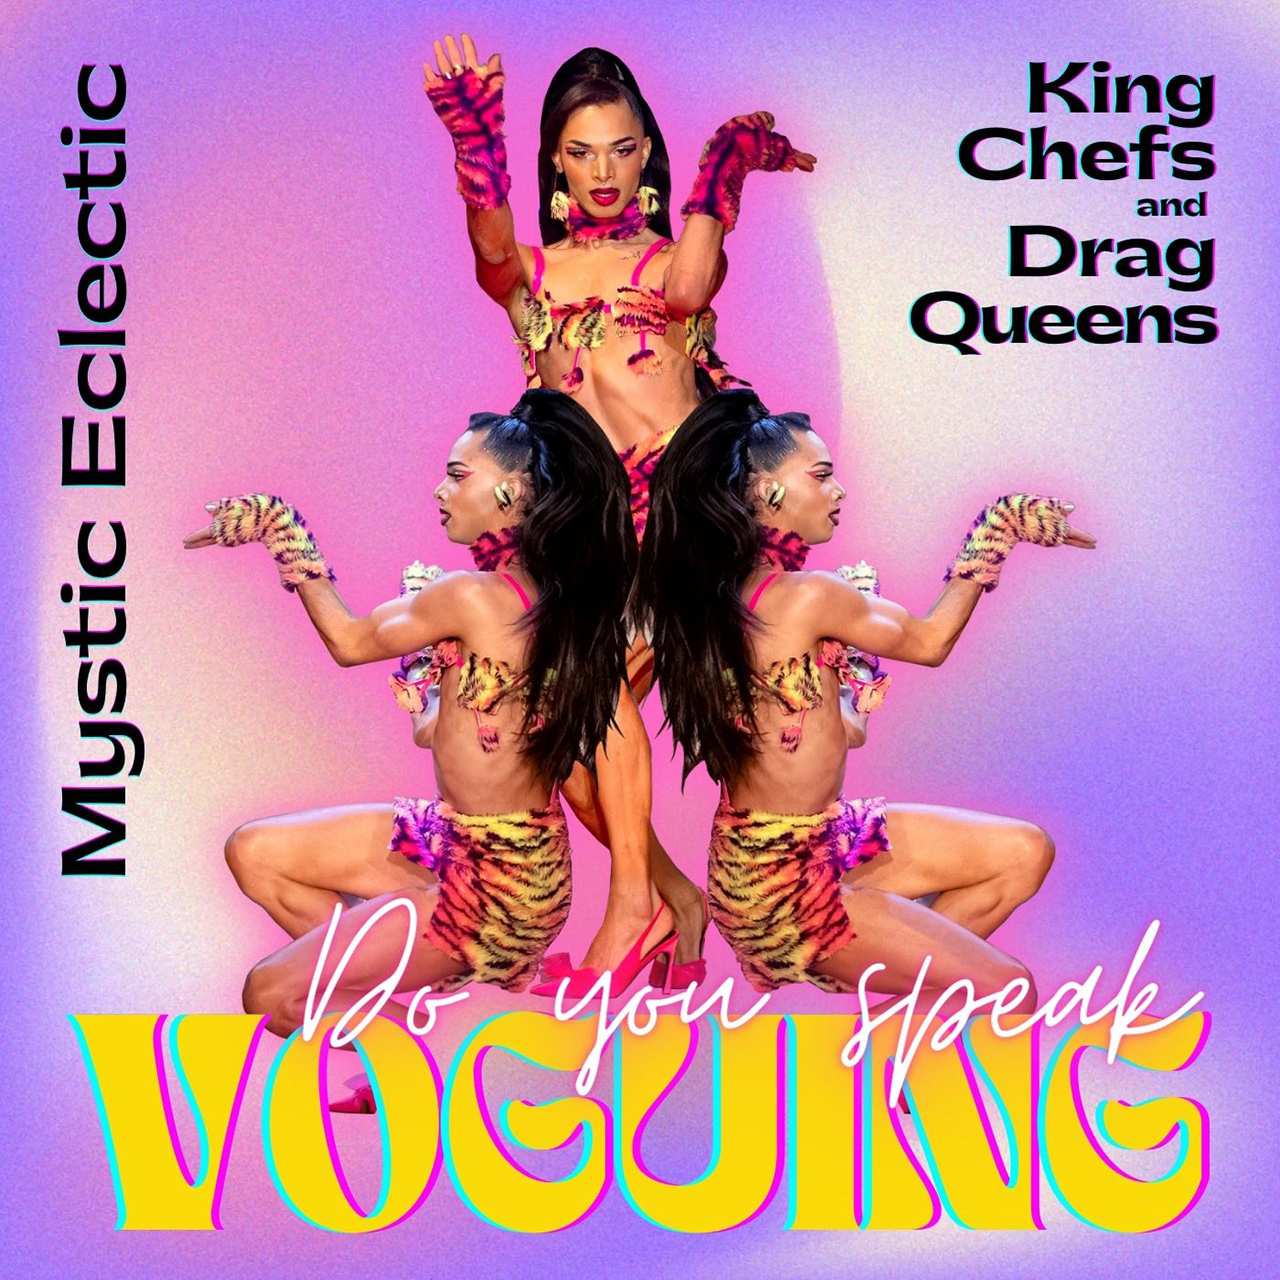 Do You Speak Voguing by Mystic Eclectic